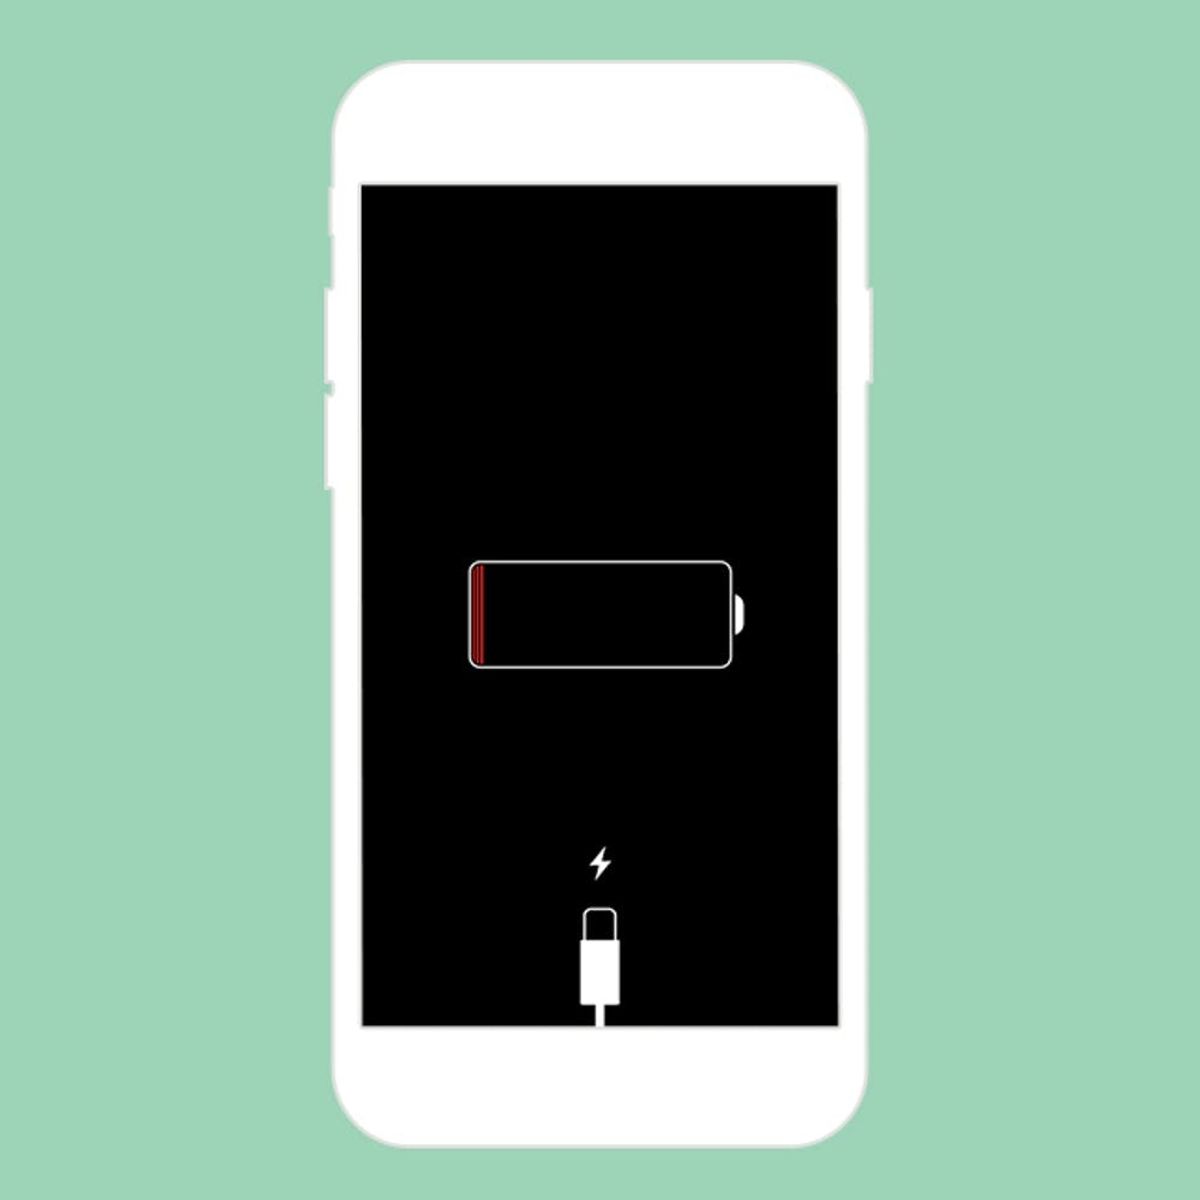 You Won’t Believe the iPhone Battery Myth That Was Just BUSTED